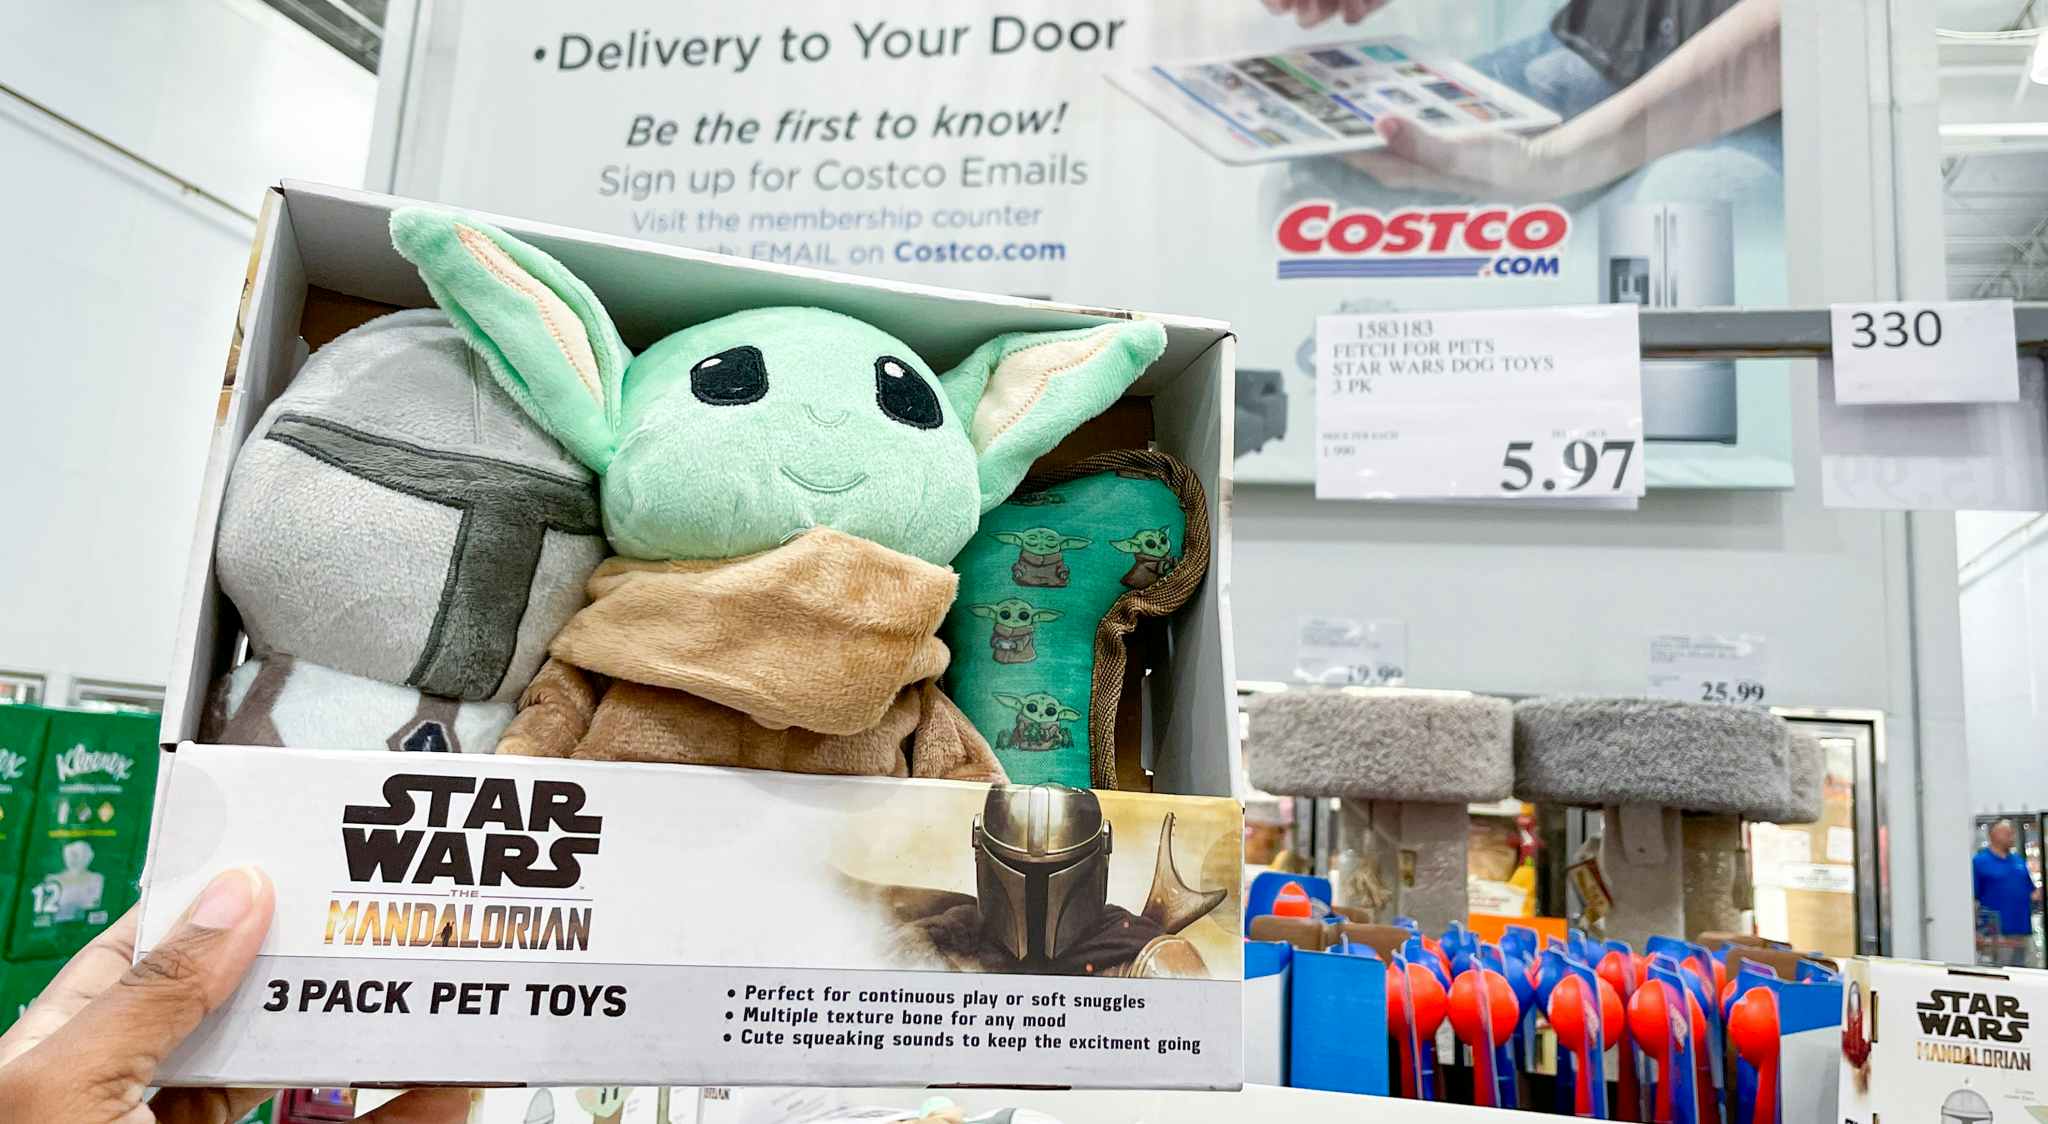 pet toy held up near sales sign at costco